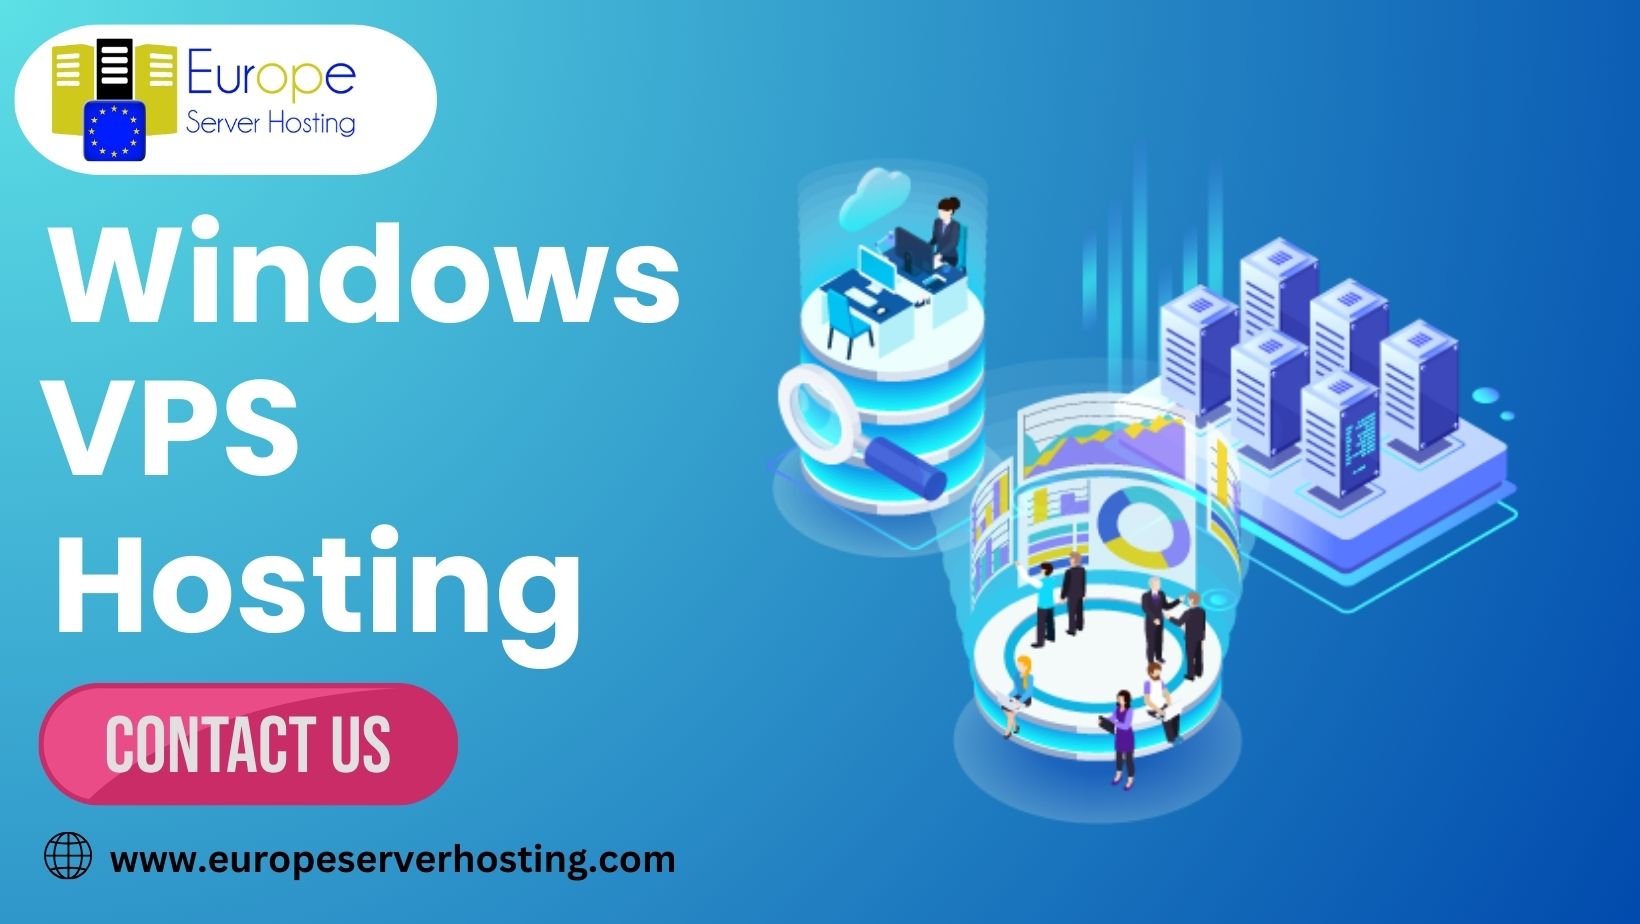 Windows VPS Hosting is a type of web hosting that uses virtualization technology to create a dedicated virtual server within a physical server